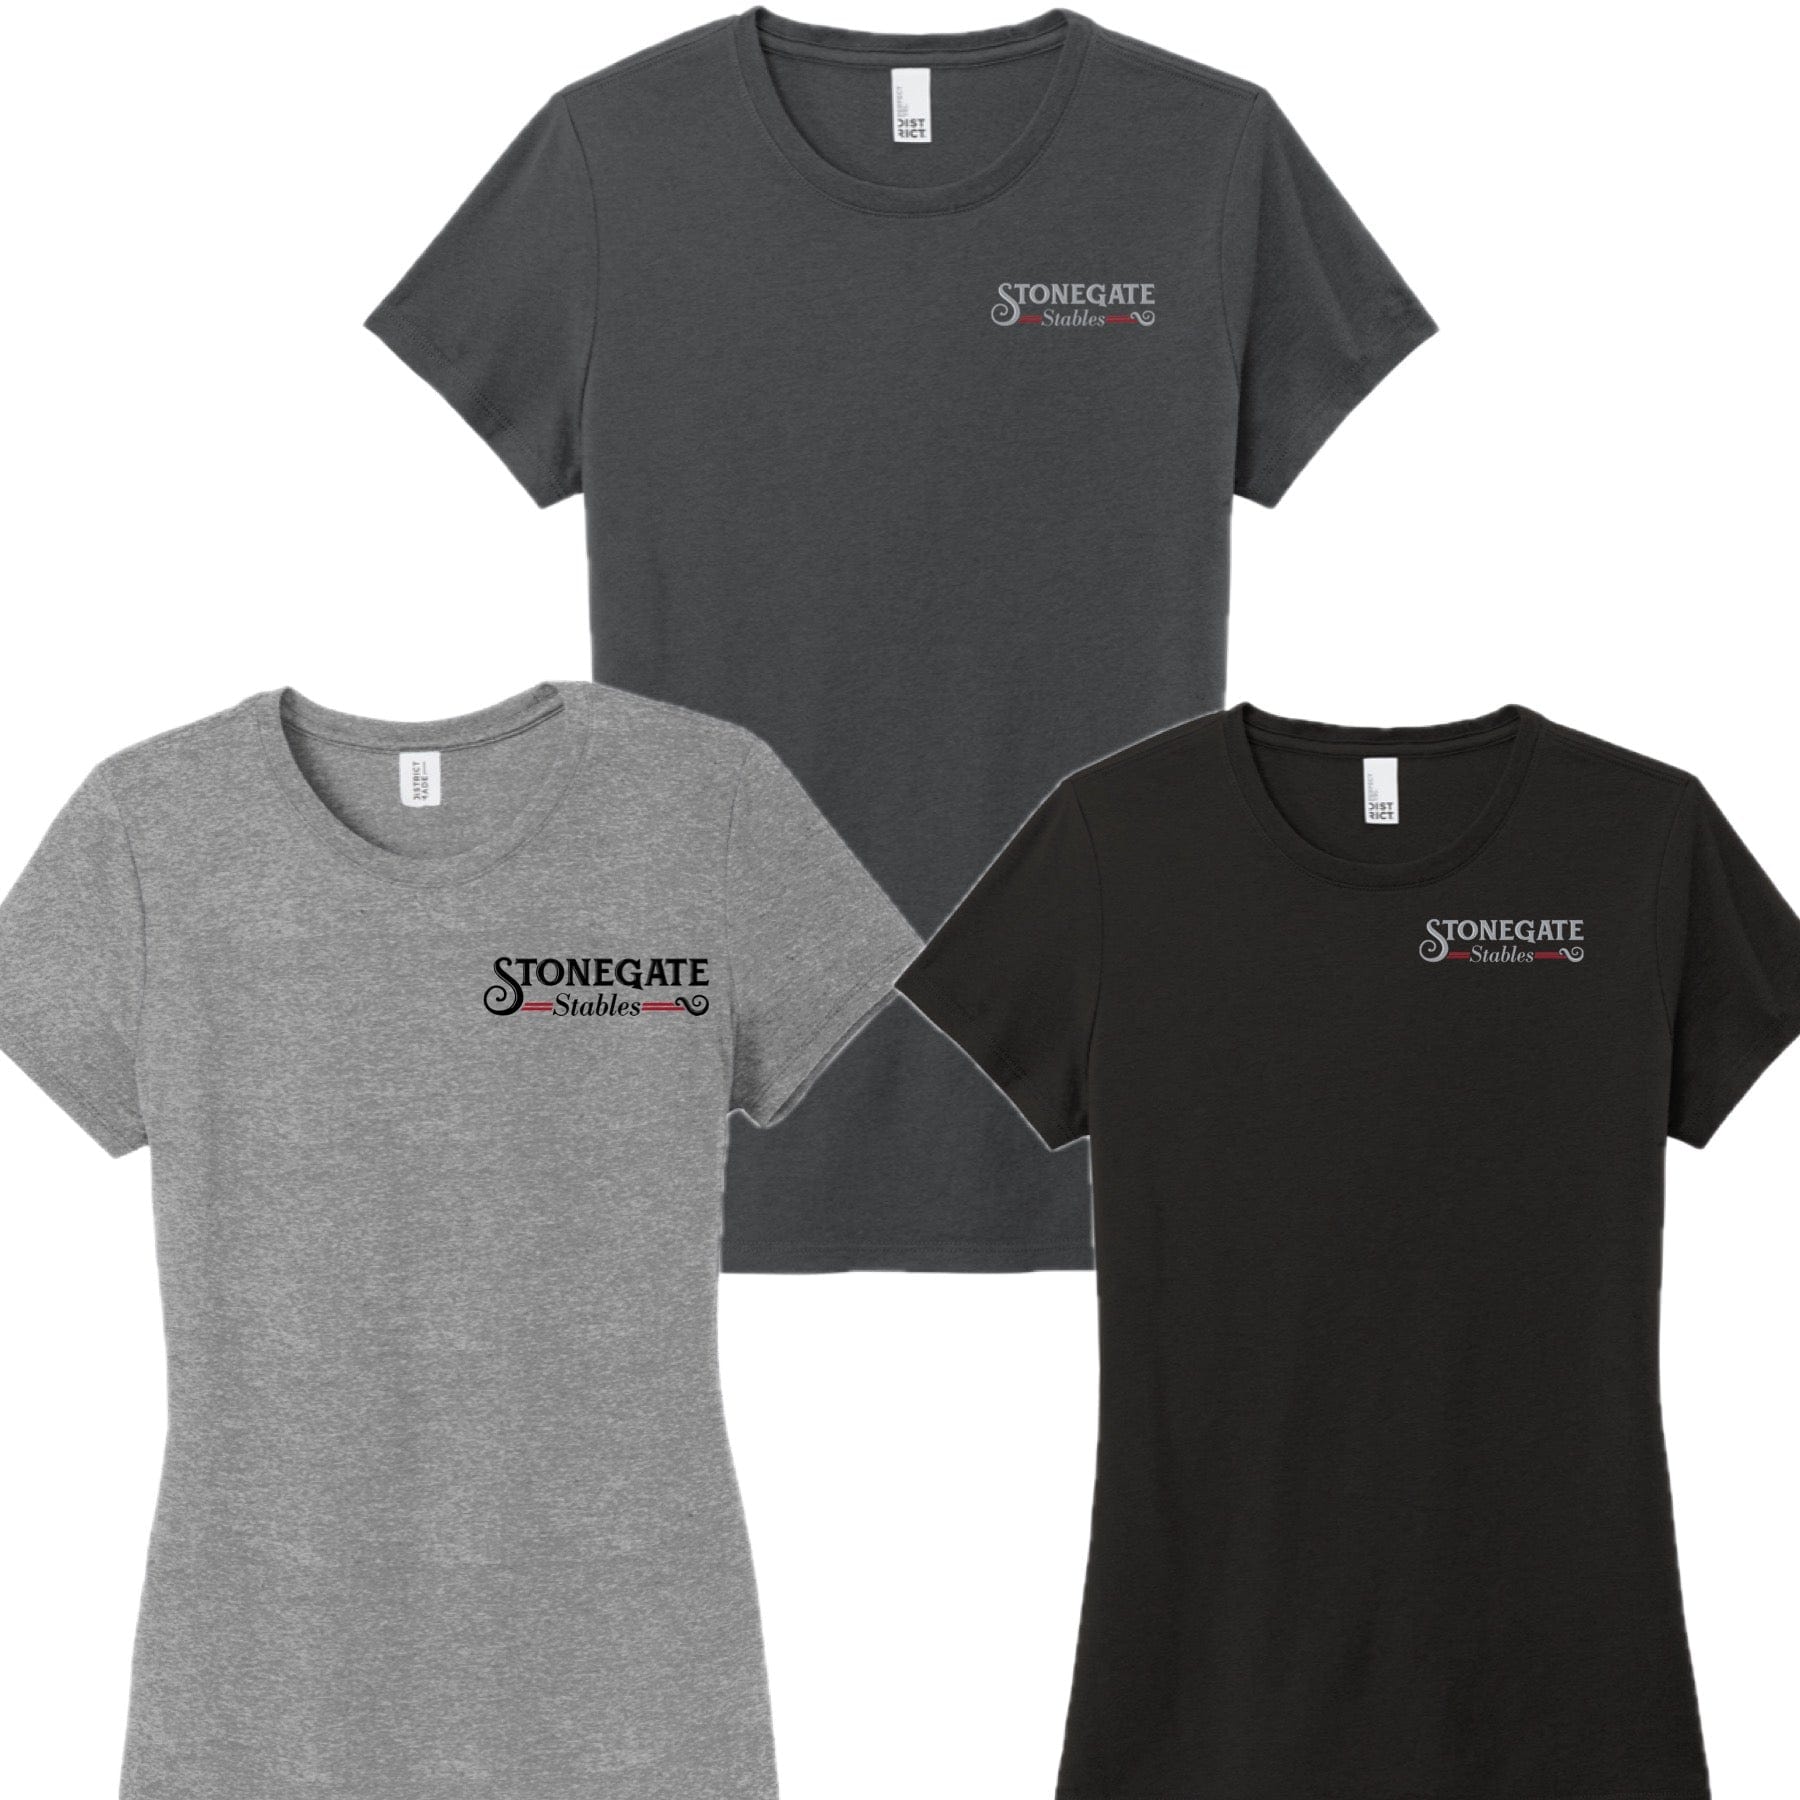 Equestrian Team Apparel Stonegate Stables Tee Shirt equestrian team apparel online tack store mobile tack store custom farm apparel custom show stable clothing equestrian lifestyle horse show clothing riding clothes horses equestrian tack store